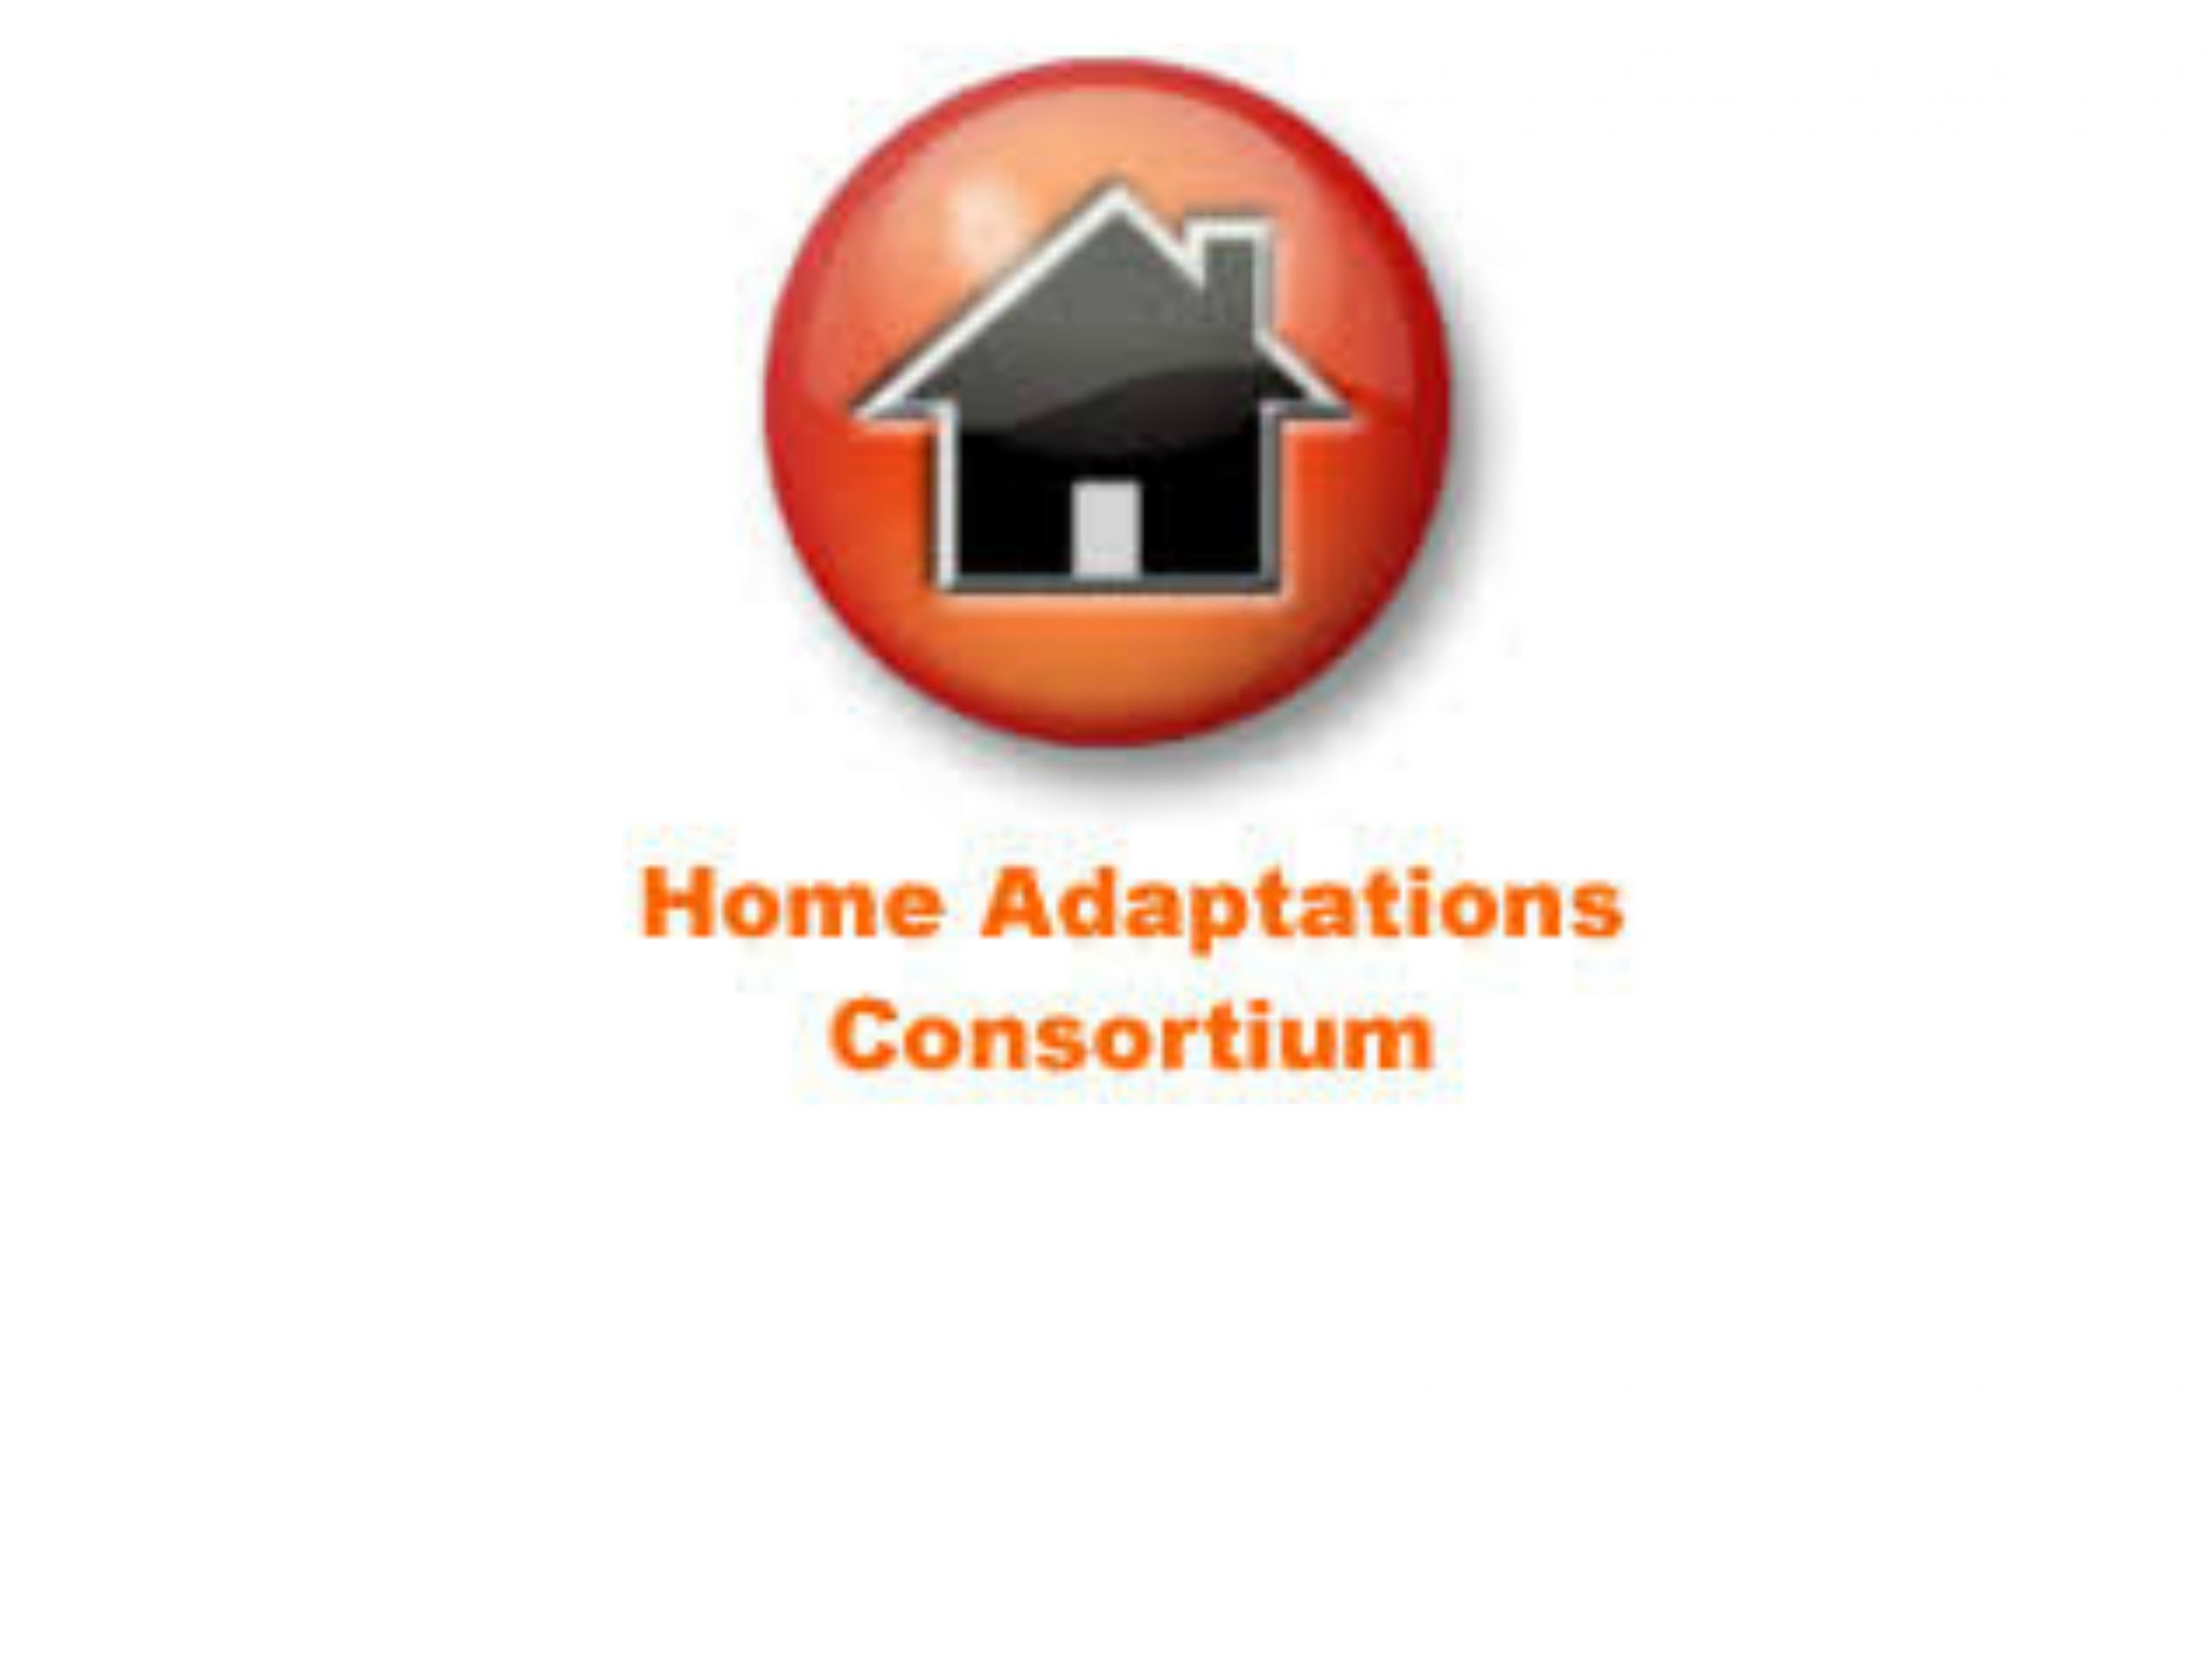 Home Adaptations: The Care Act 2014 and Related Provision Across the UK